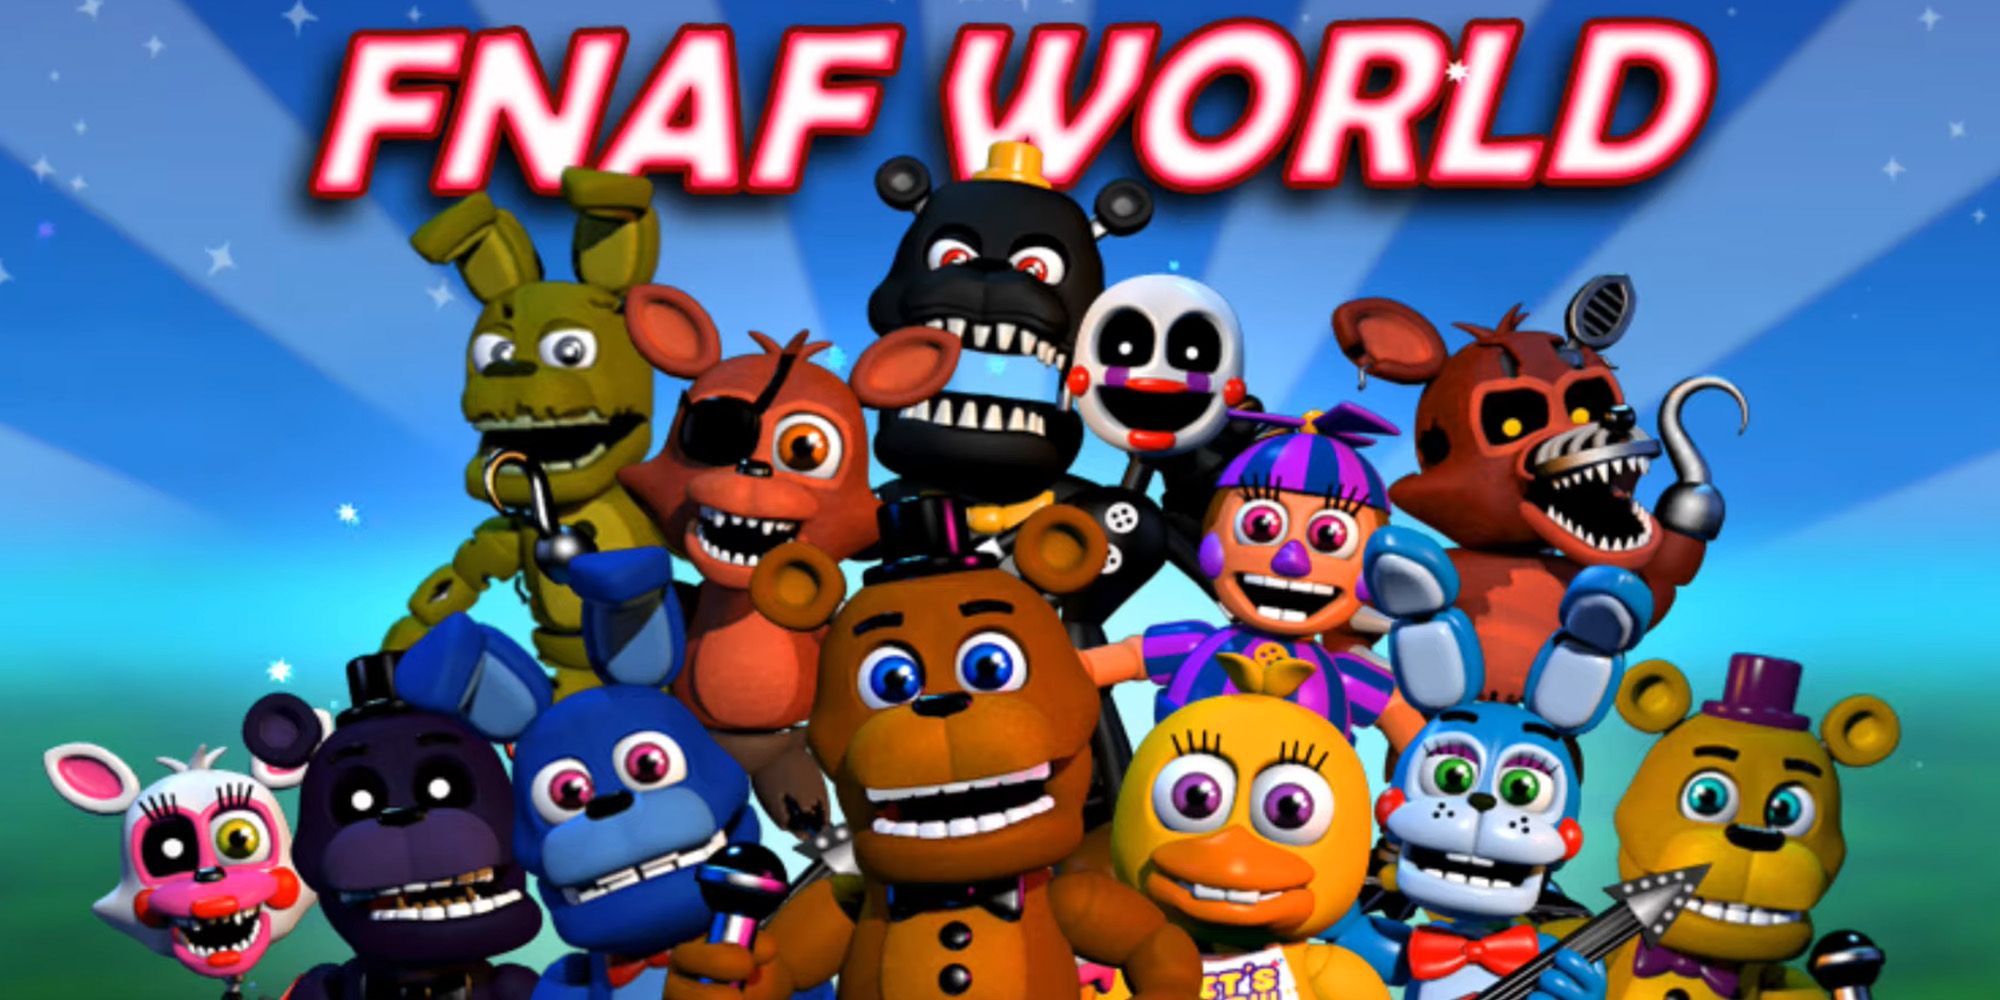 FNAF World - Freddy, Chica, Bonnie, Foxy, And The Rest Of The Cast Standing Beneath The Logo